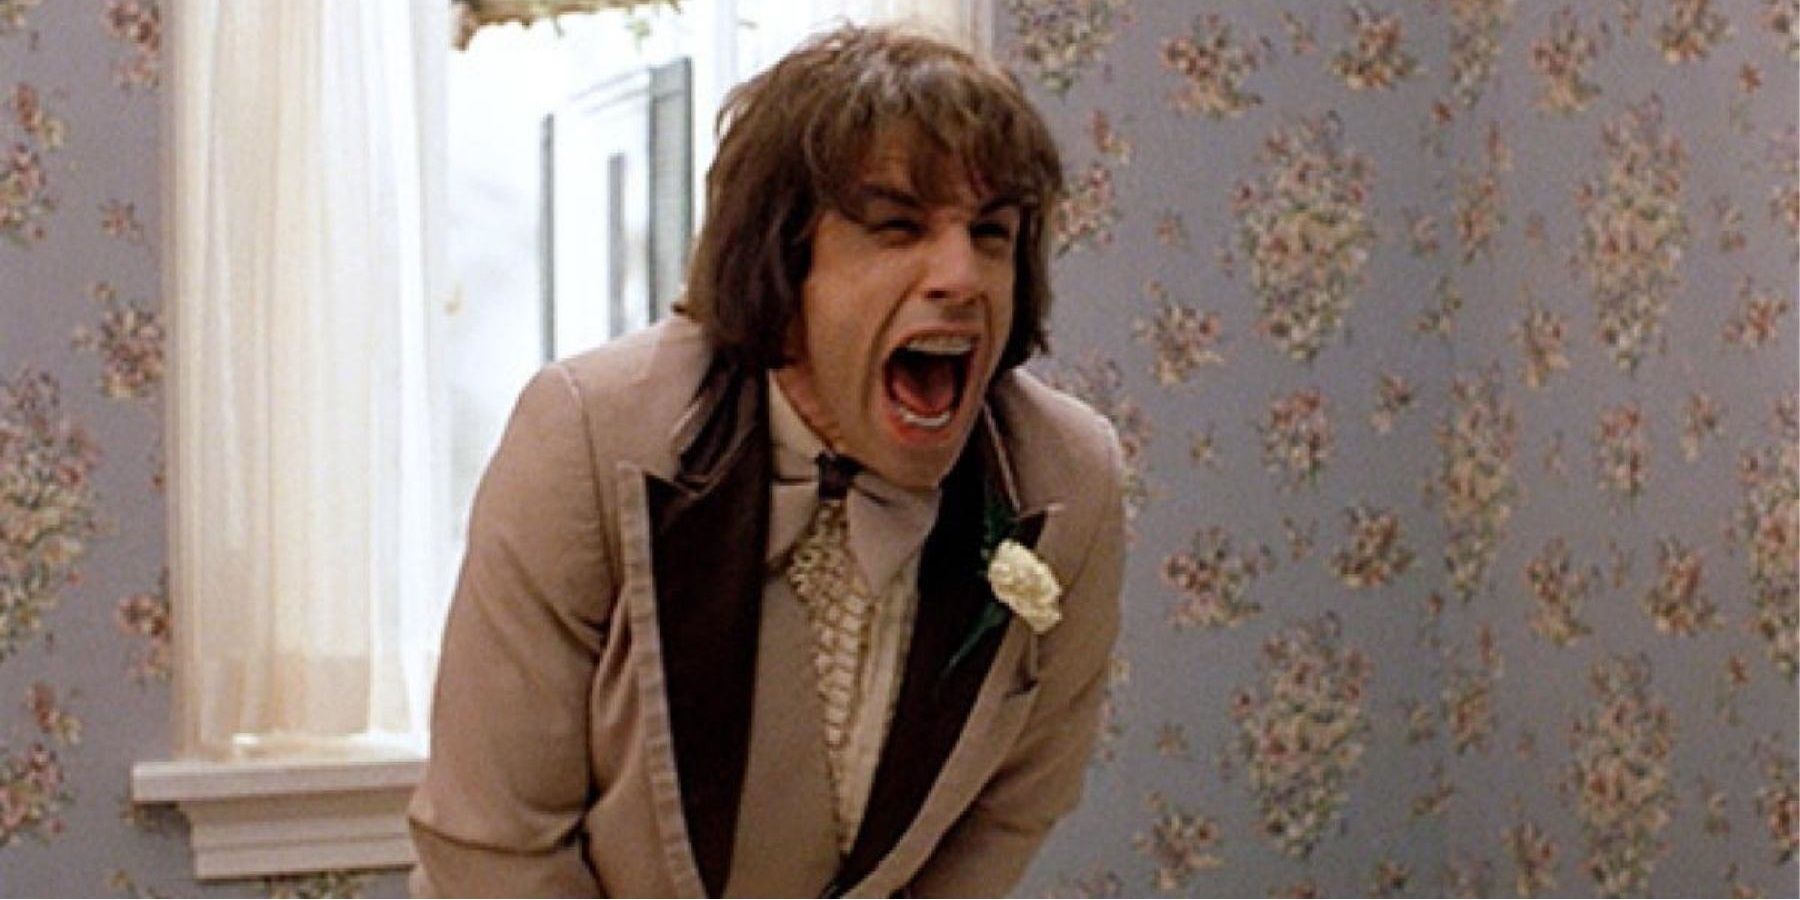 Ben Stiller in There's Something About Mary, looking like he is in pain